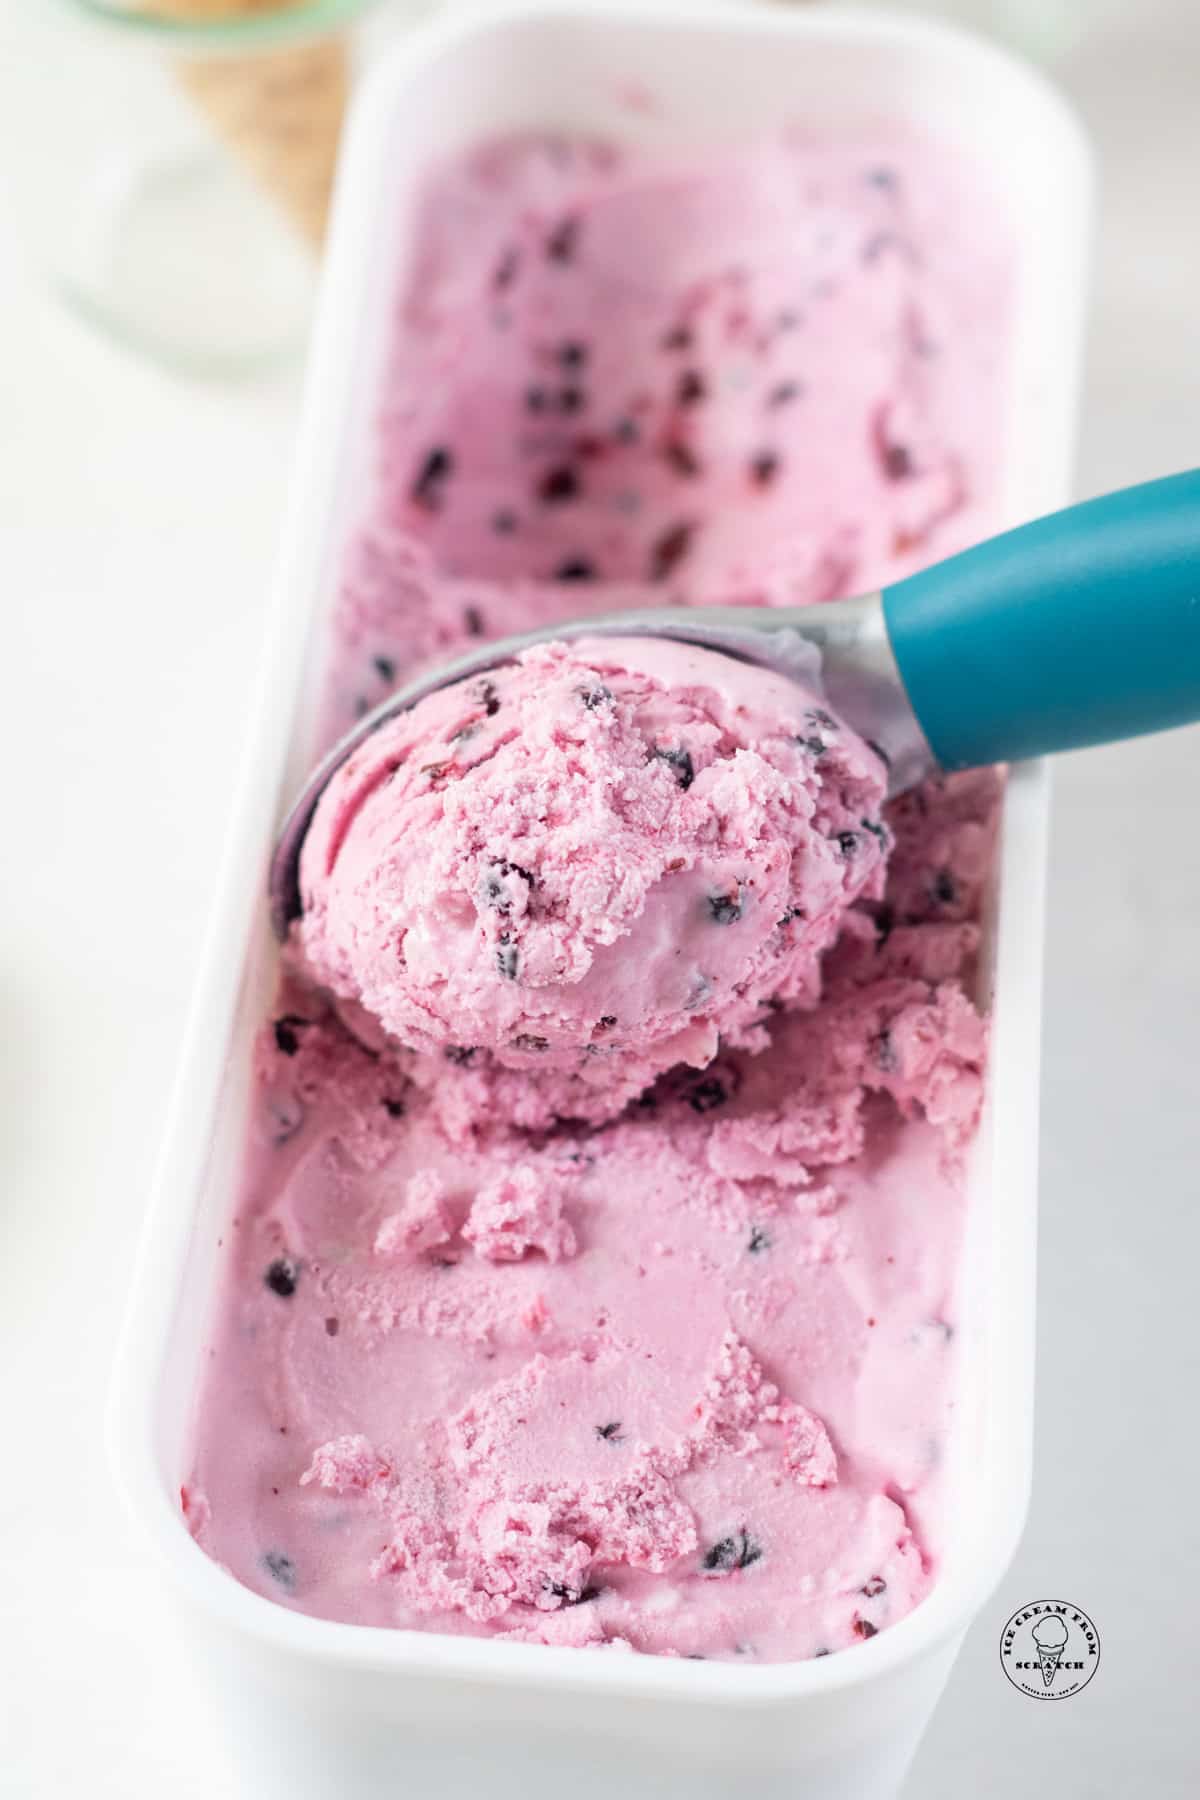 a blue ice cream scoop scooping huckleberry ice cream from a white plastic container.